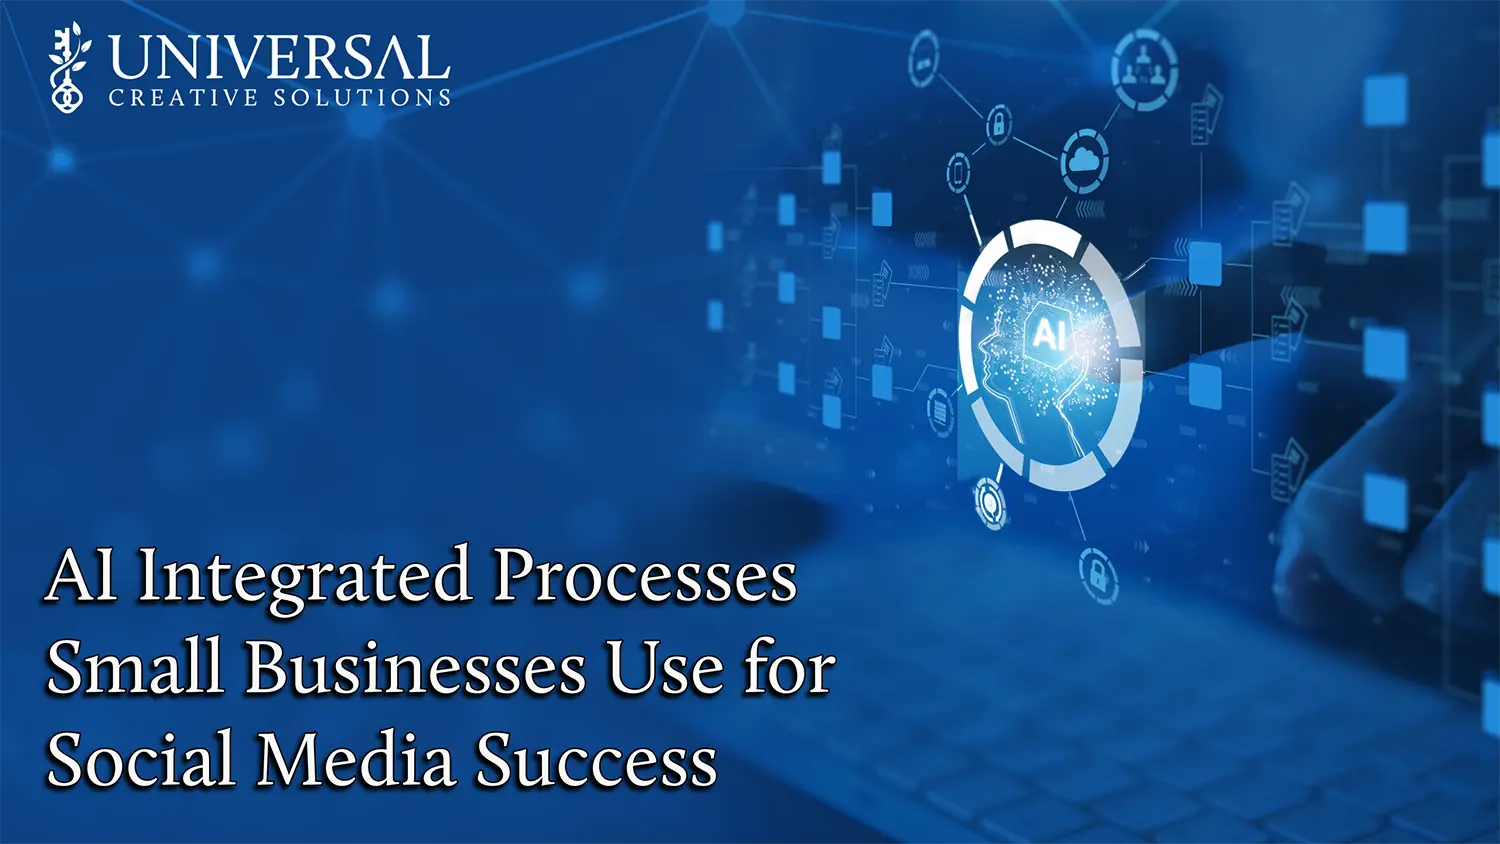 AI Integrated Processes Small Businesses Use for Social Media Success